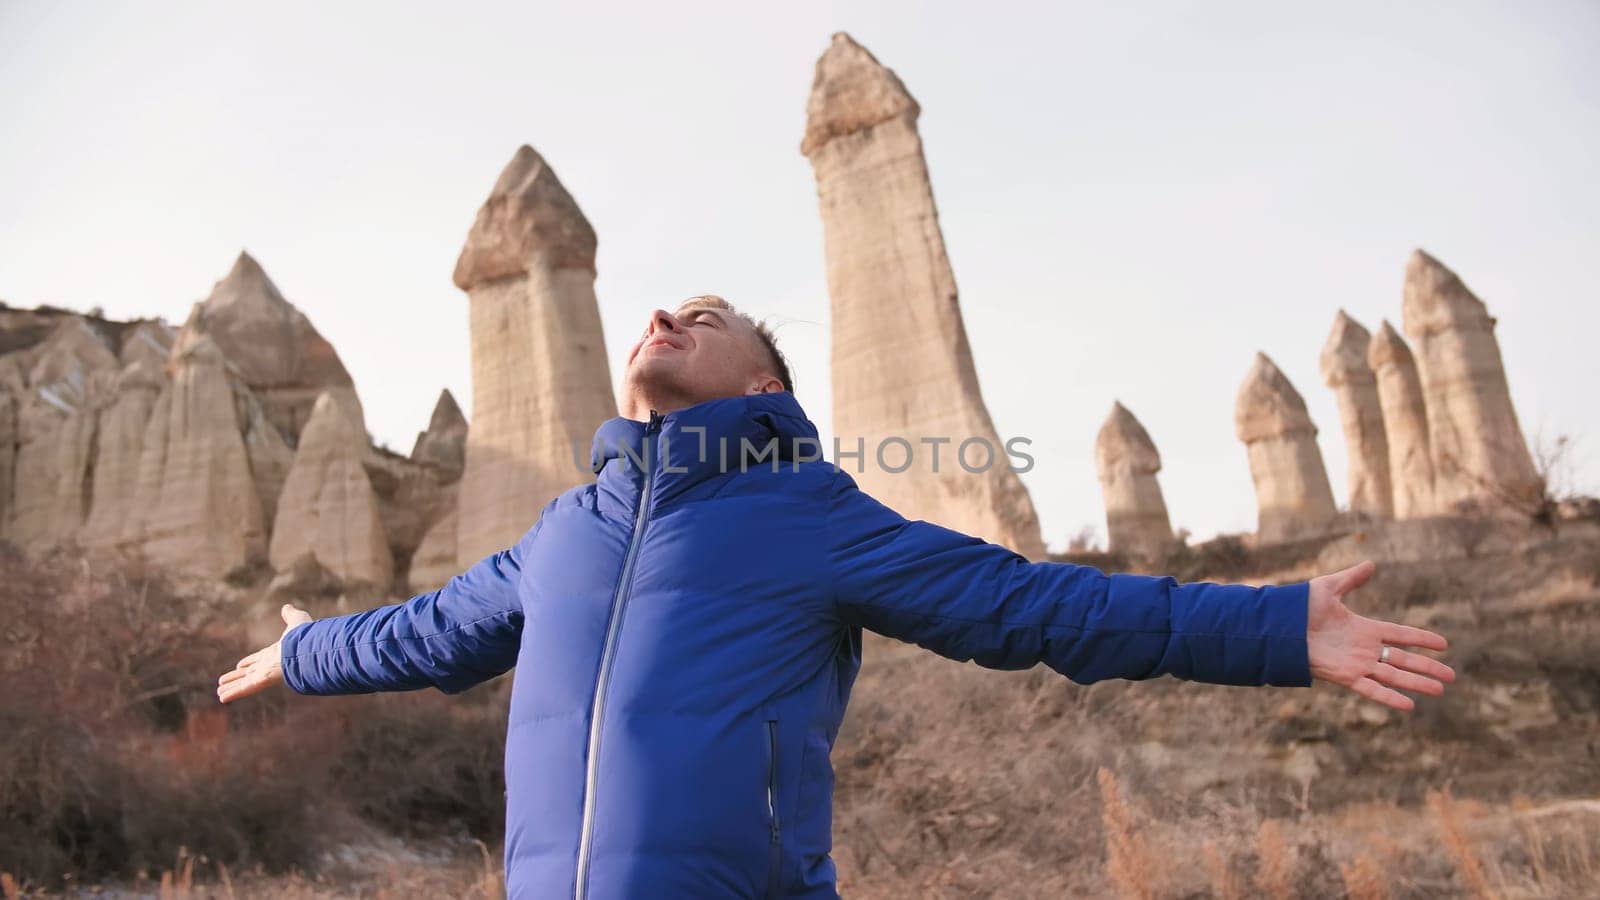 Russian tourist energized in the Valley of Love in Goreme Cappadocia Turkey during the freezing winter months